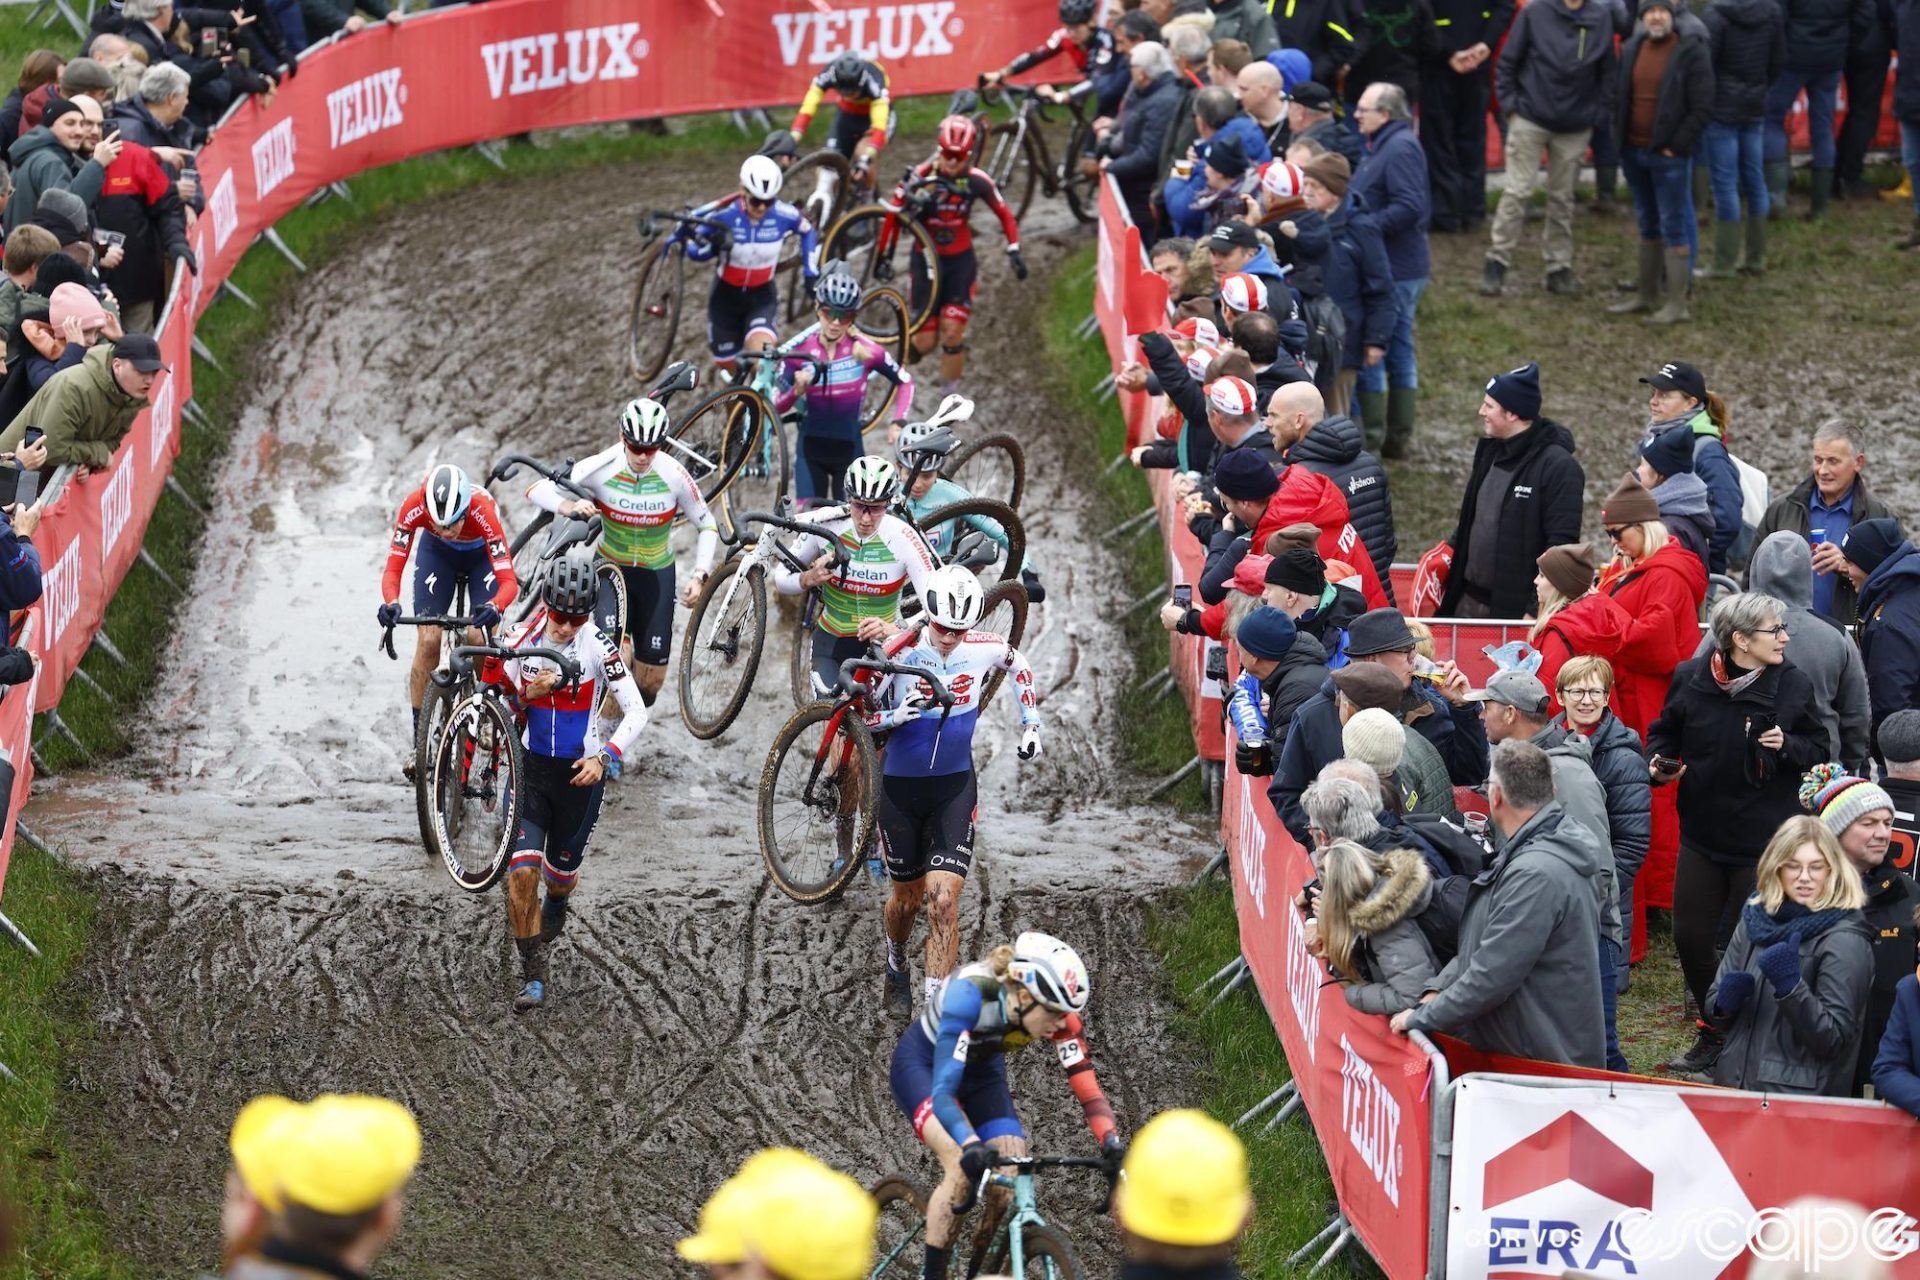 Women racers tackle another day of mud at Dendermonde World Cup. Some are riding, some are running, and the mud is just as soupy as the day before.